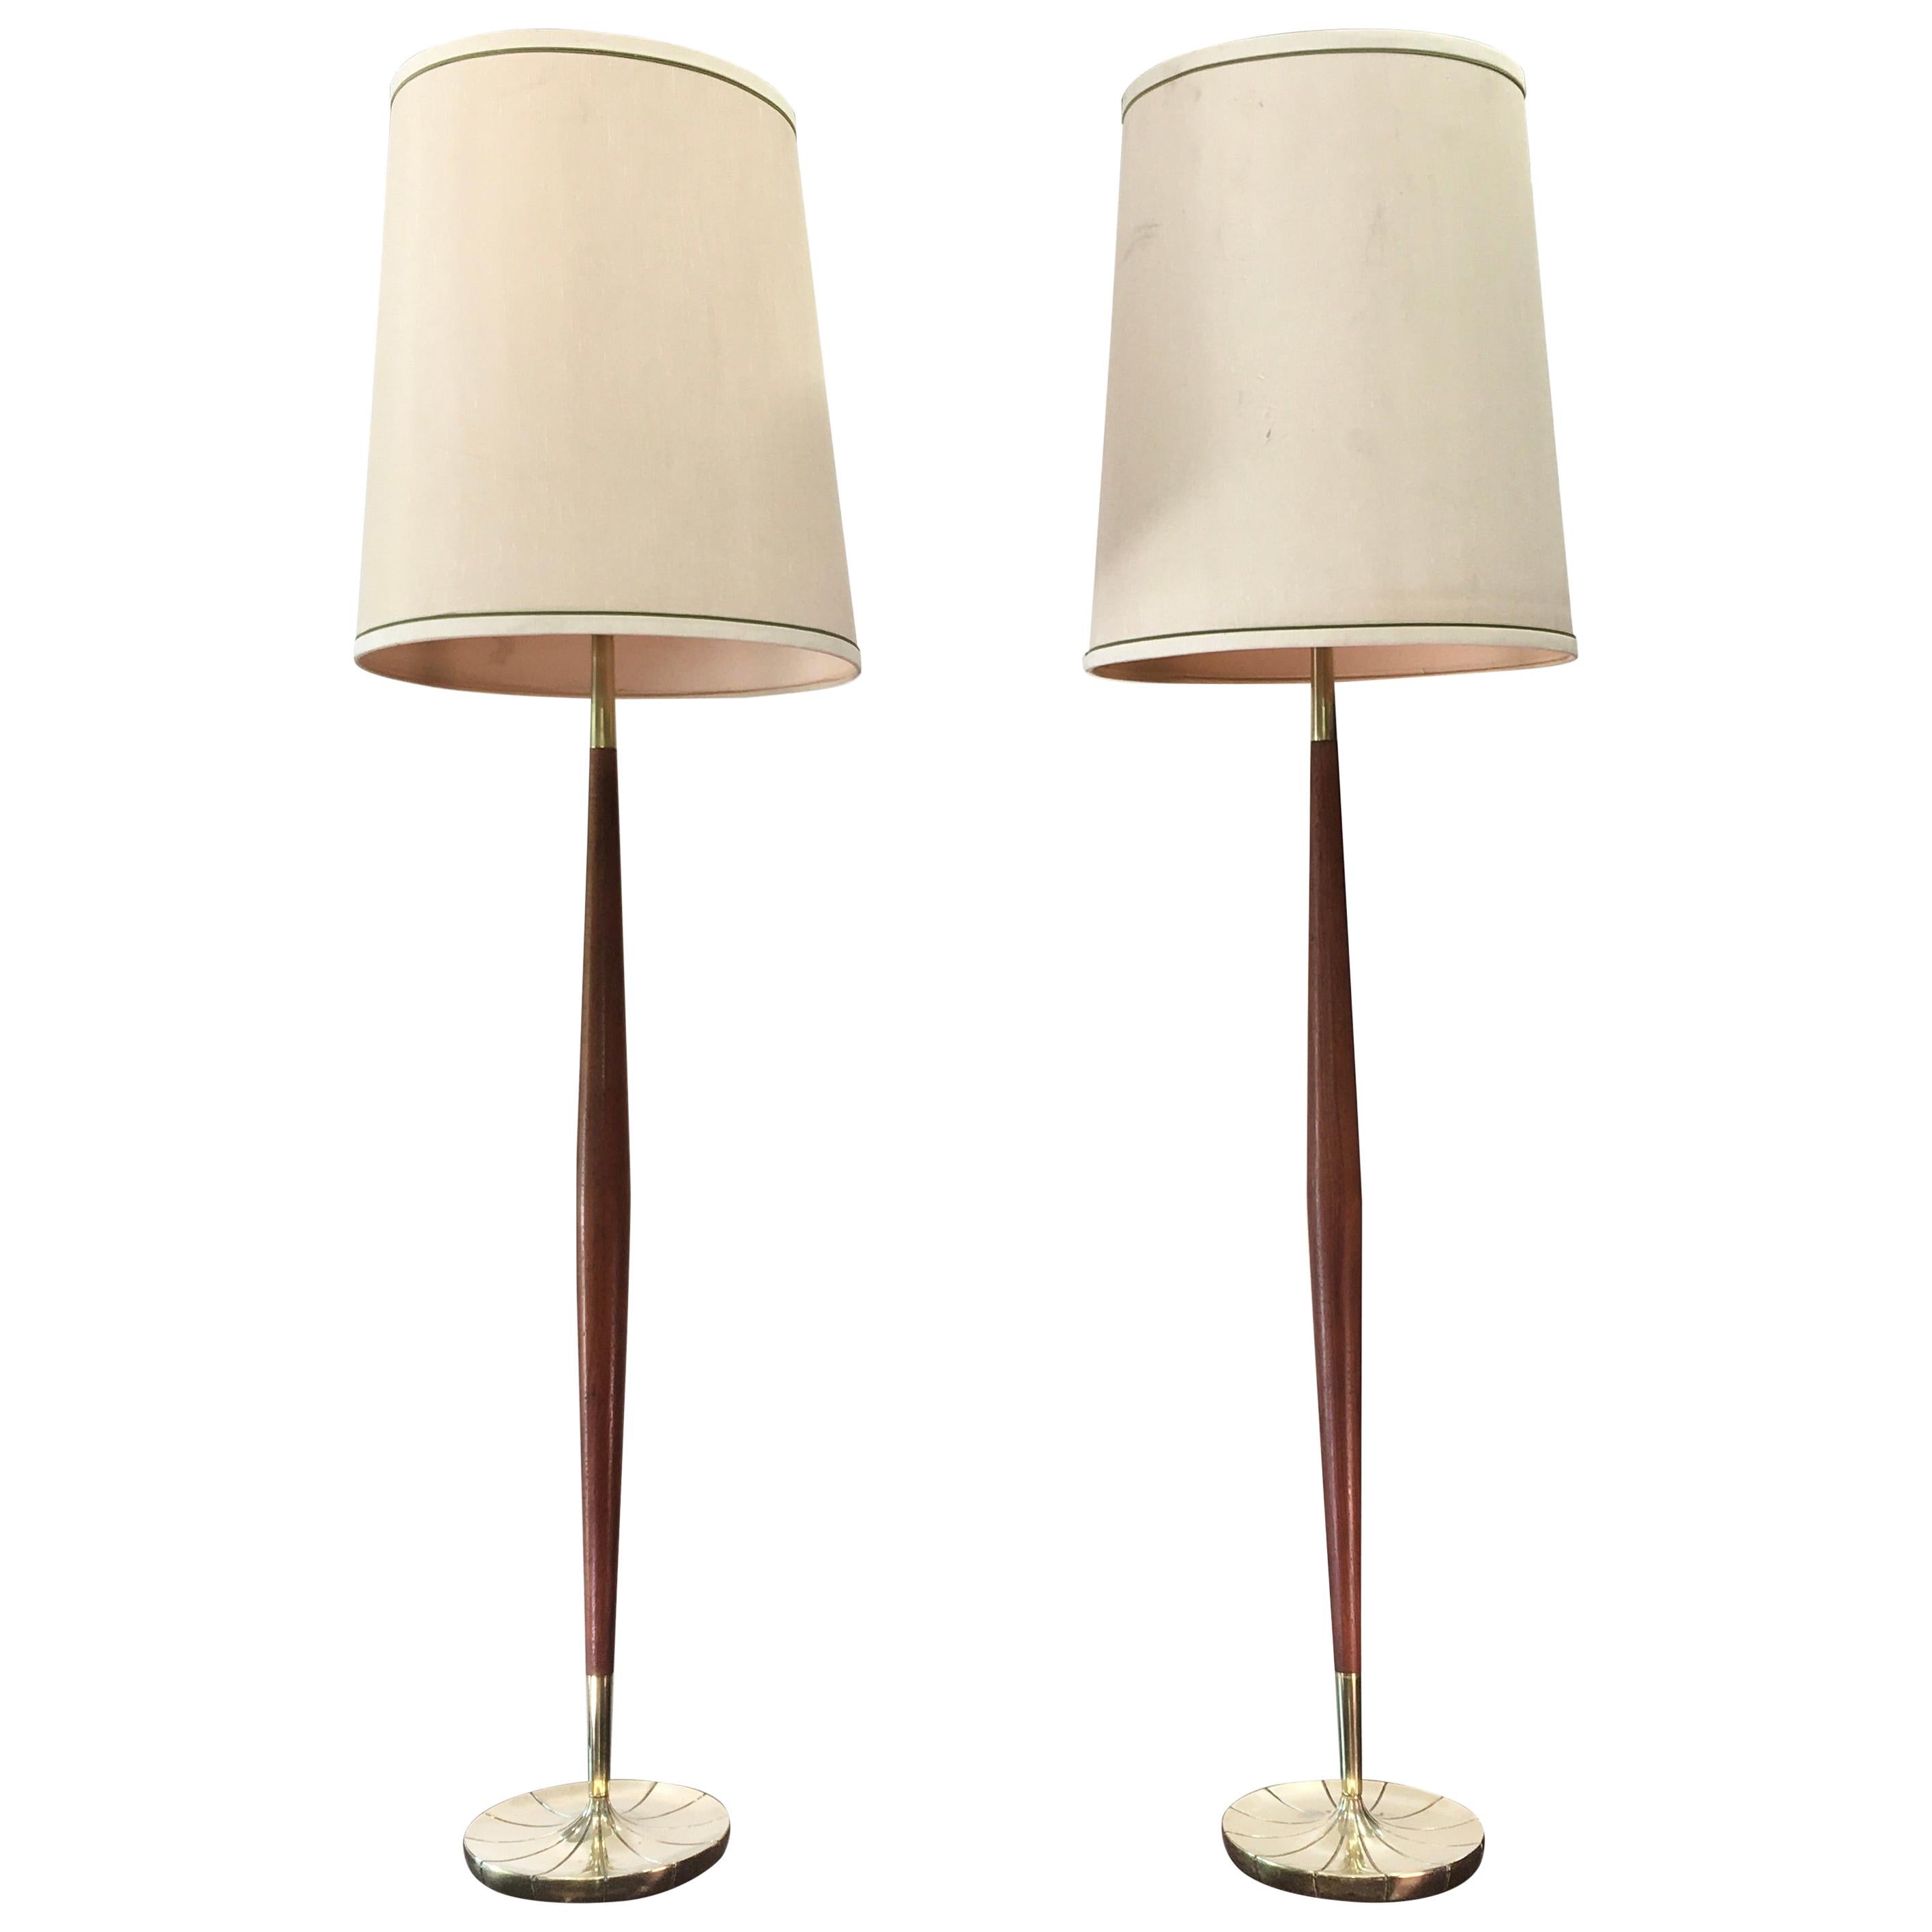 Tapered Walnut And Brass Floor Lamps, Stiffel Burnished Brass Double Pull Chain Table Lamp